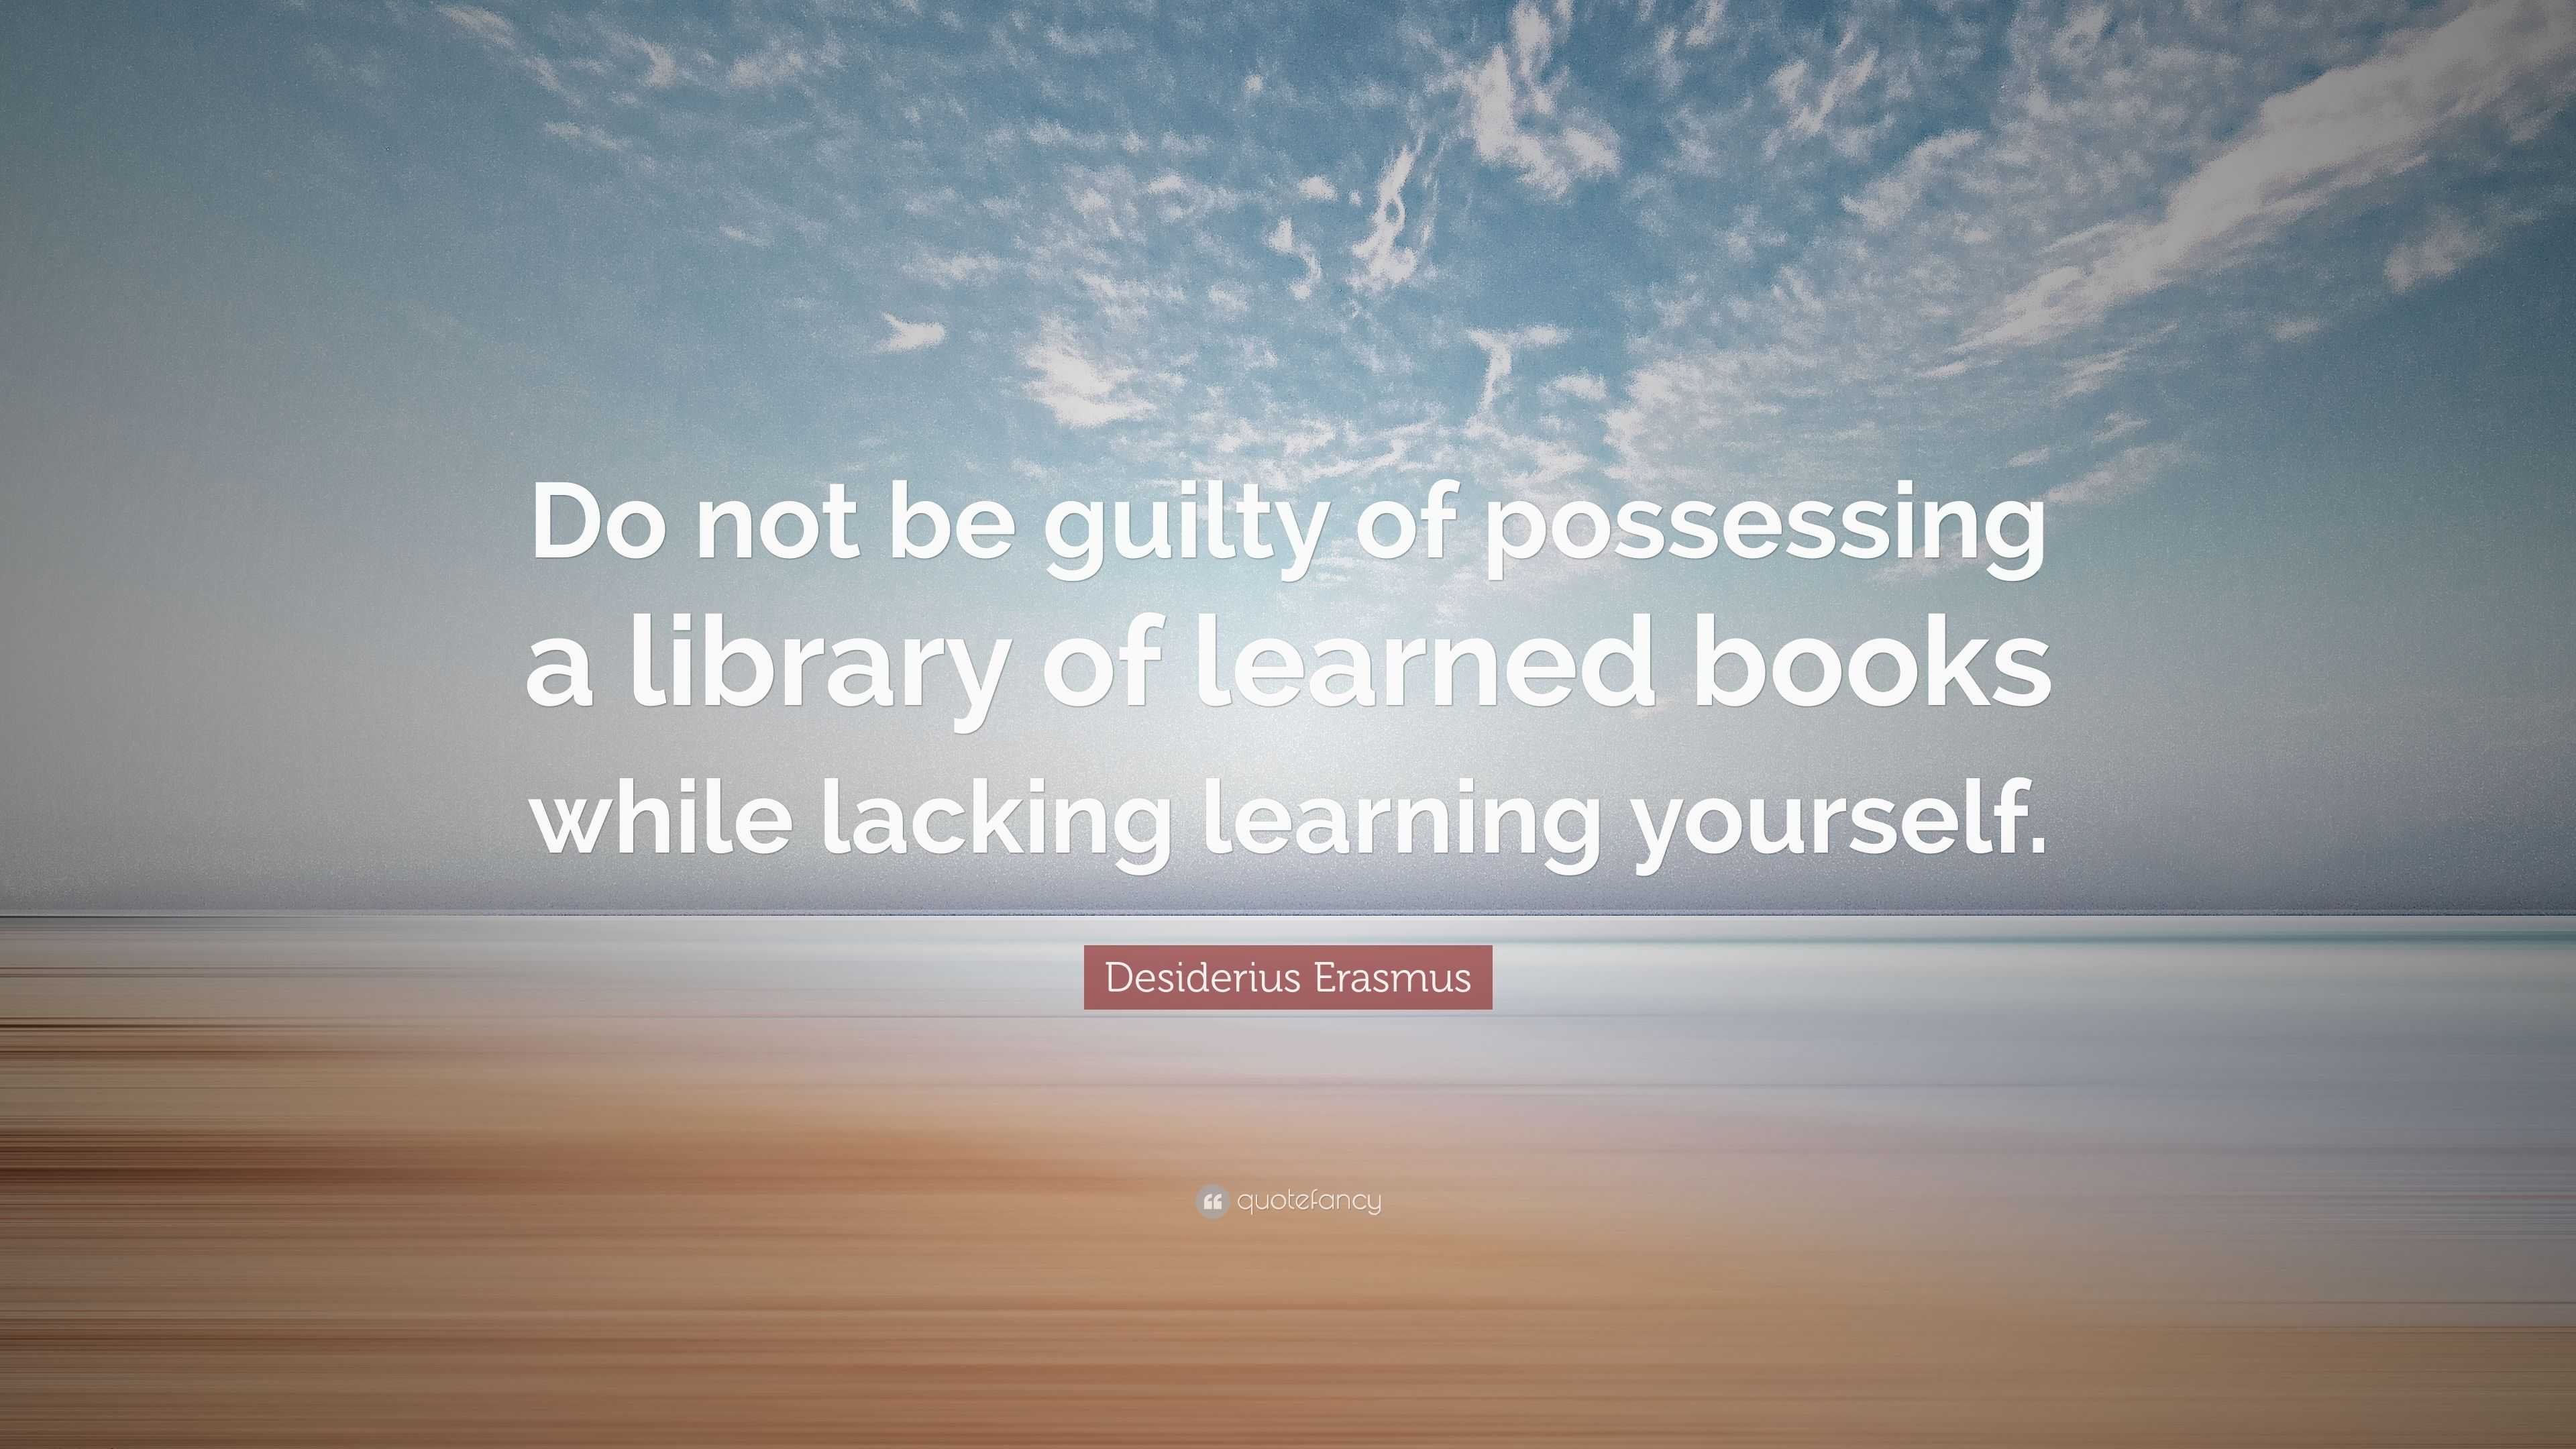 Desiderius Erasmus Quote: “Do not be guilty of possessing a library of ...